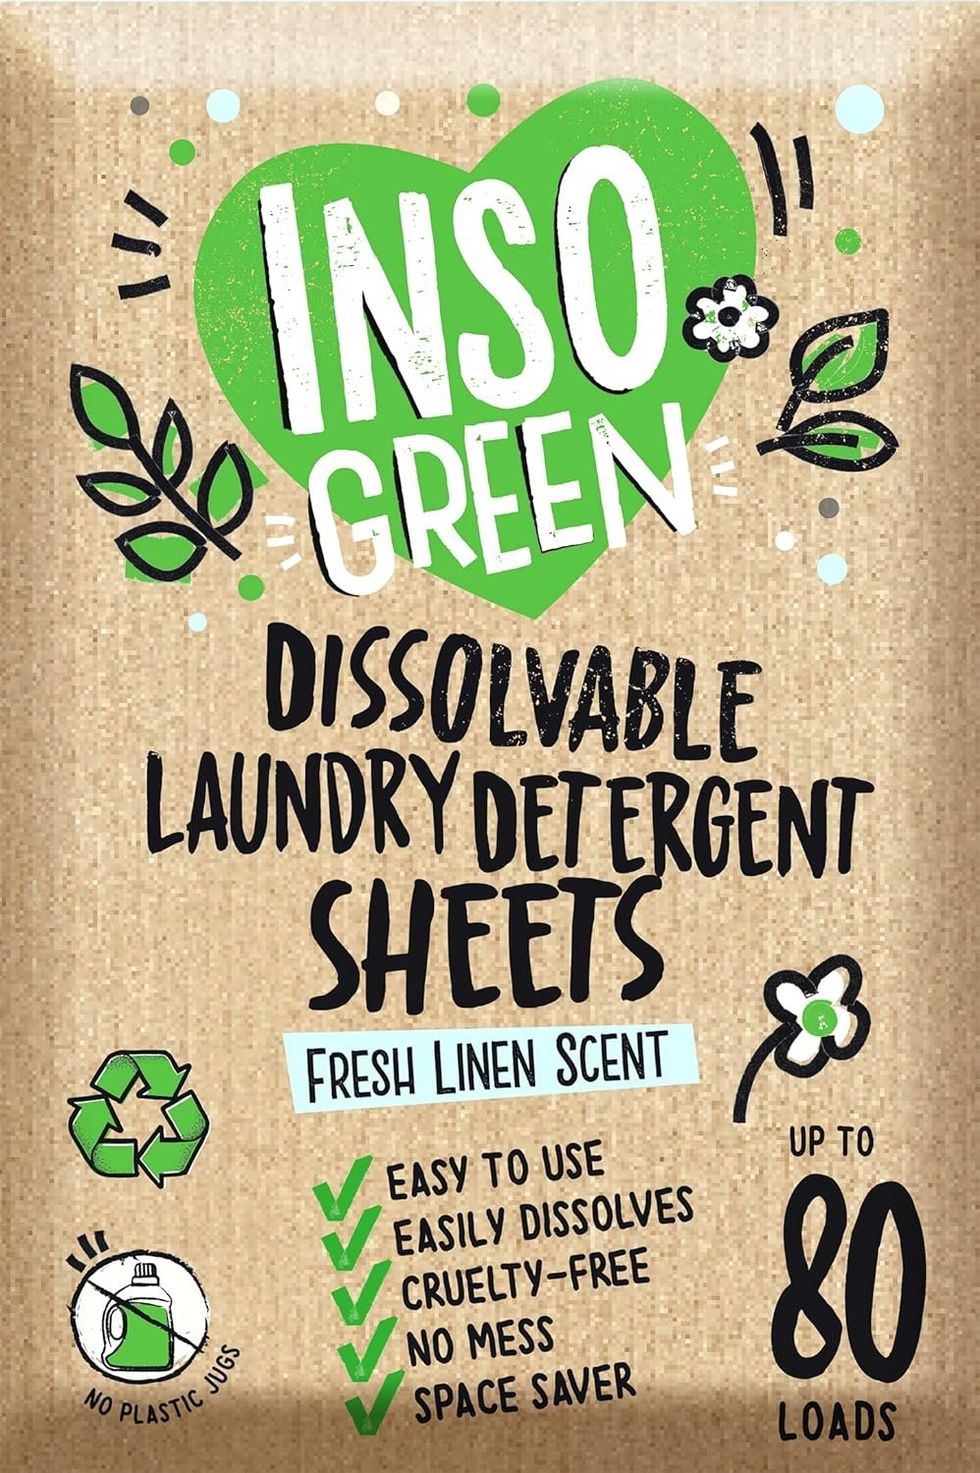 Insogreen laundry detergent sheets